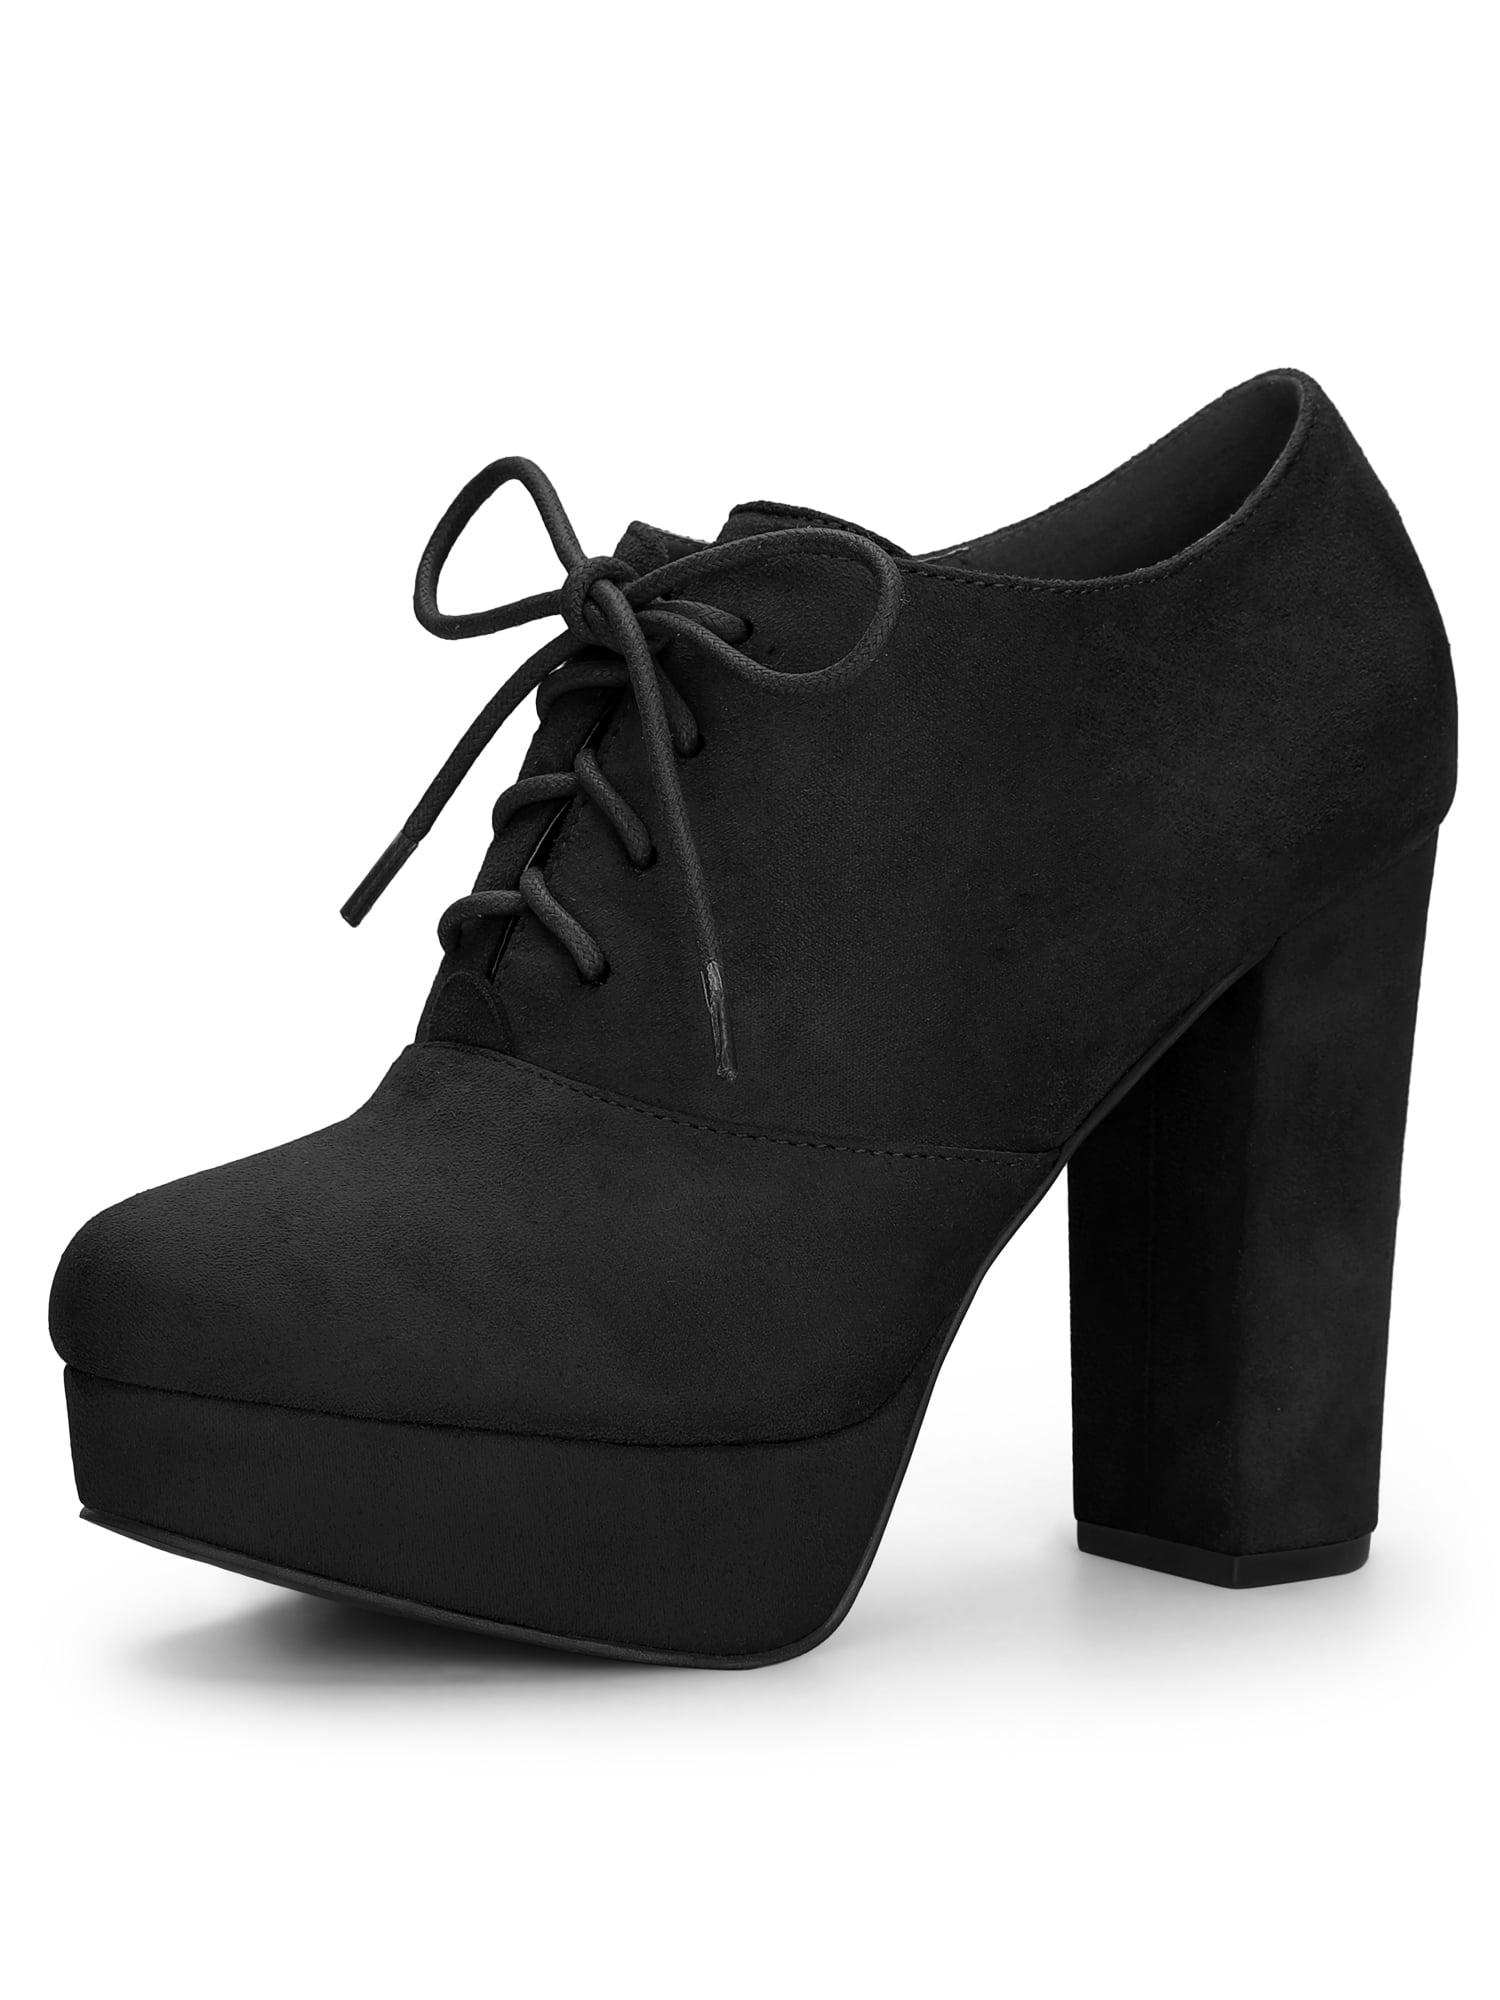 lace up booties canada